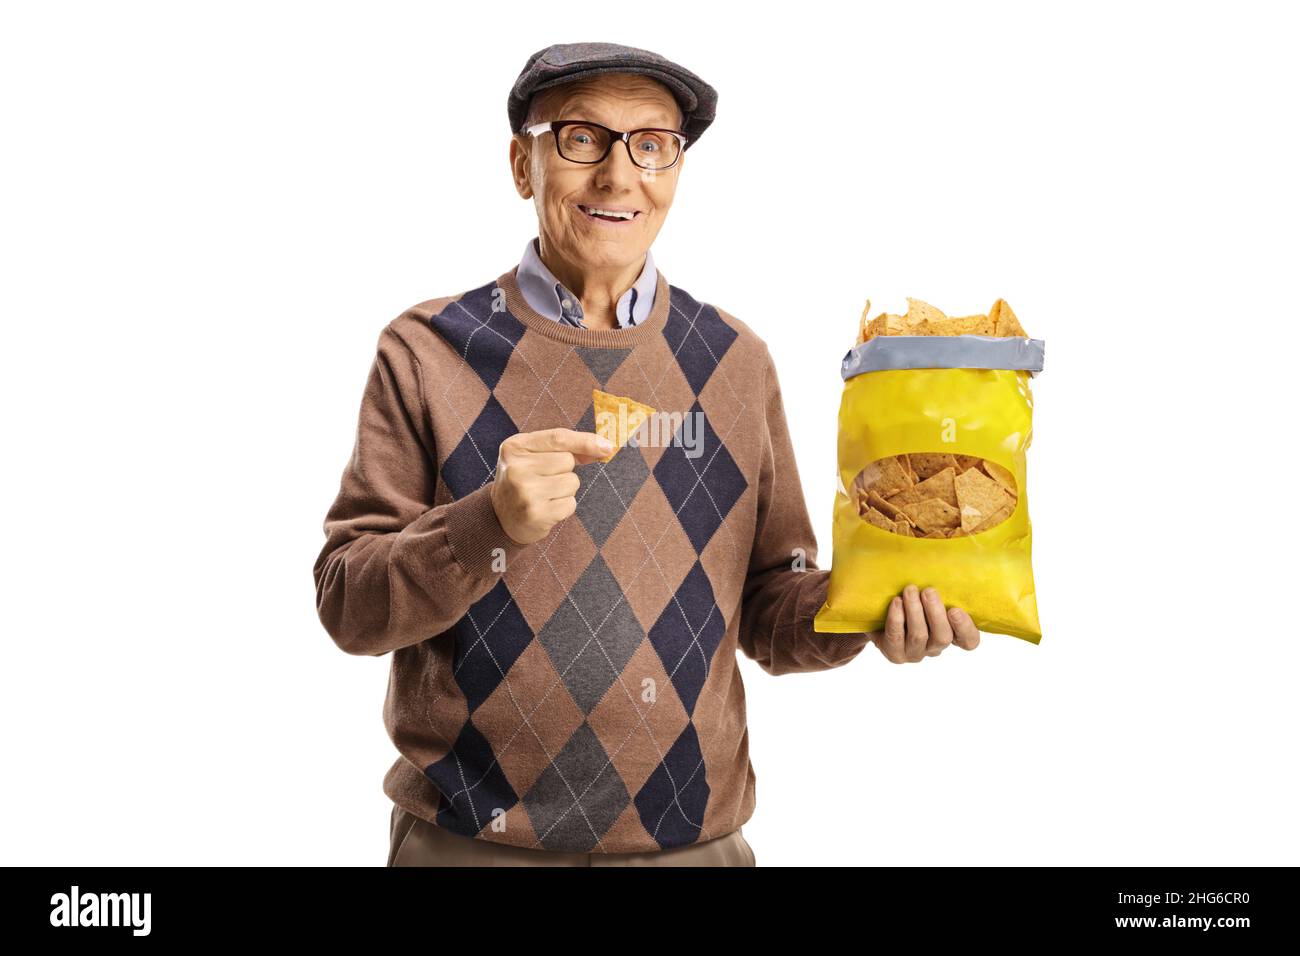 Elderly man holding a pack of tortilla chips isolated on white background Stock Photo